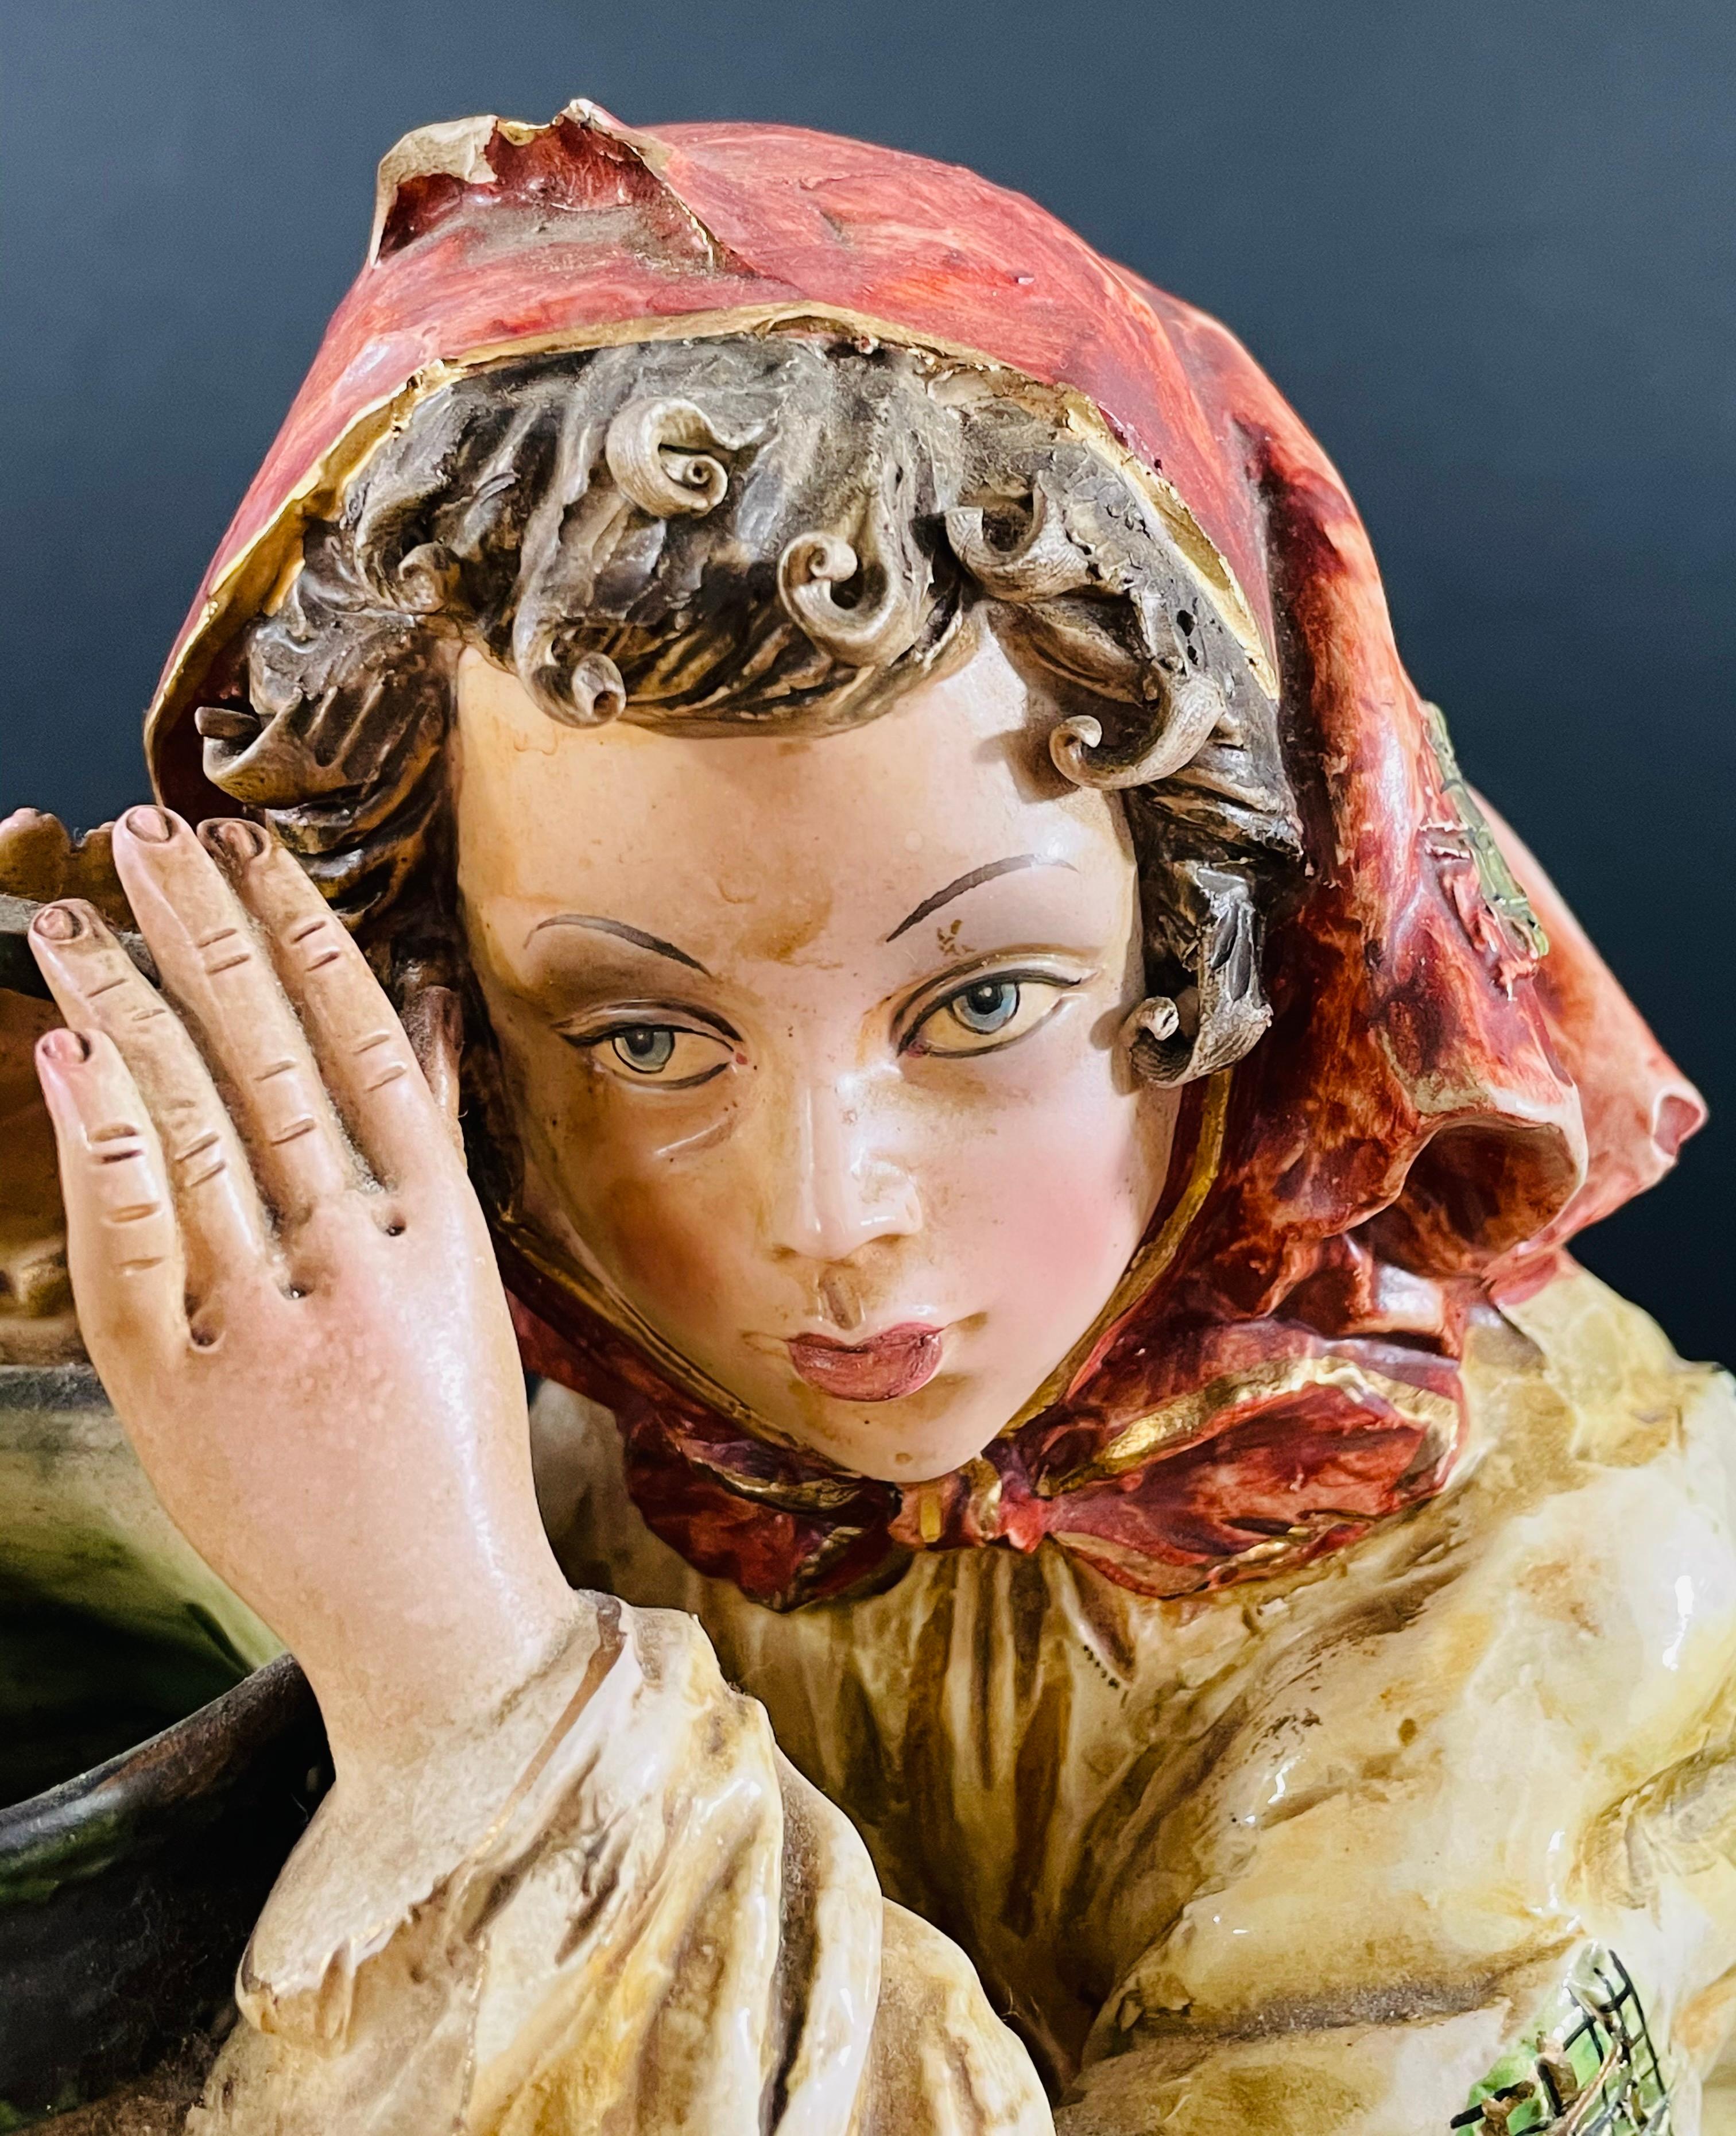 A 1970's vintage Italian porcelain sculpture or statue of a framer girl holding a jar. The statue features intricate details and is skillfully hand painted. The pensive farmer girl is setting on the floor while leaning on a small table and holding a